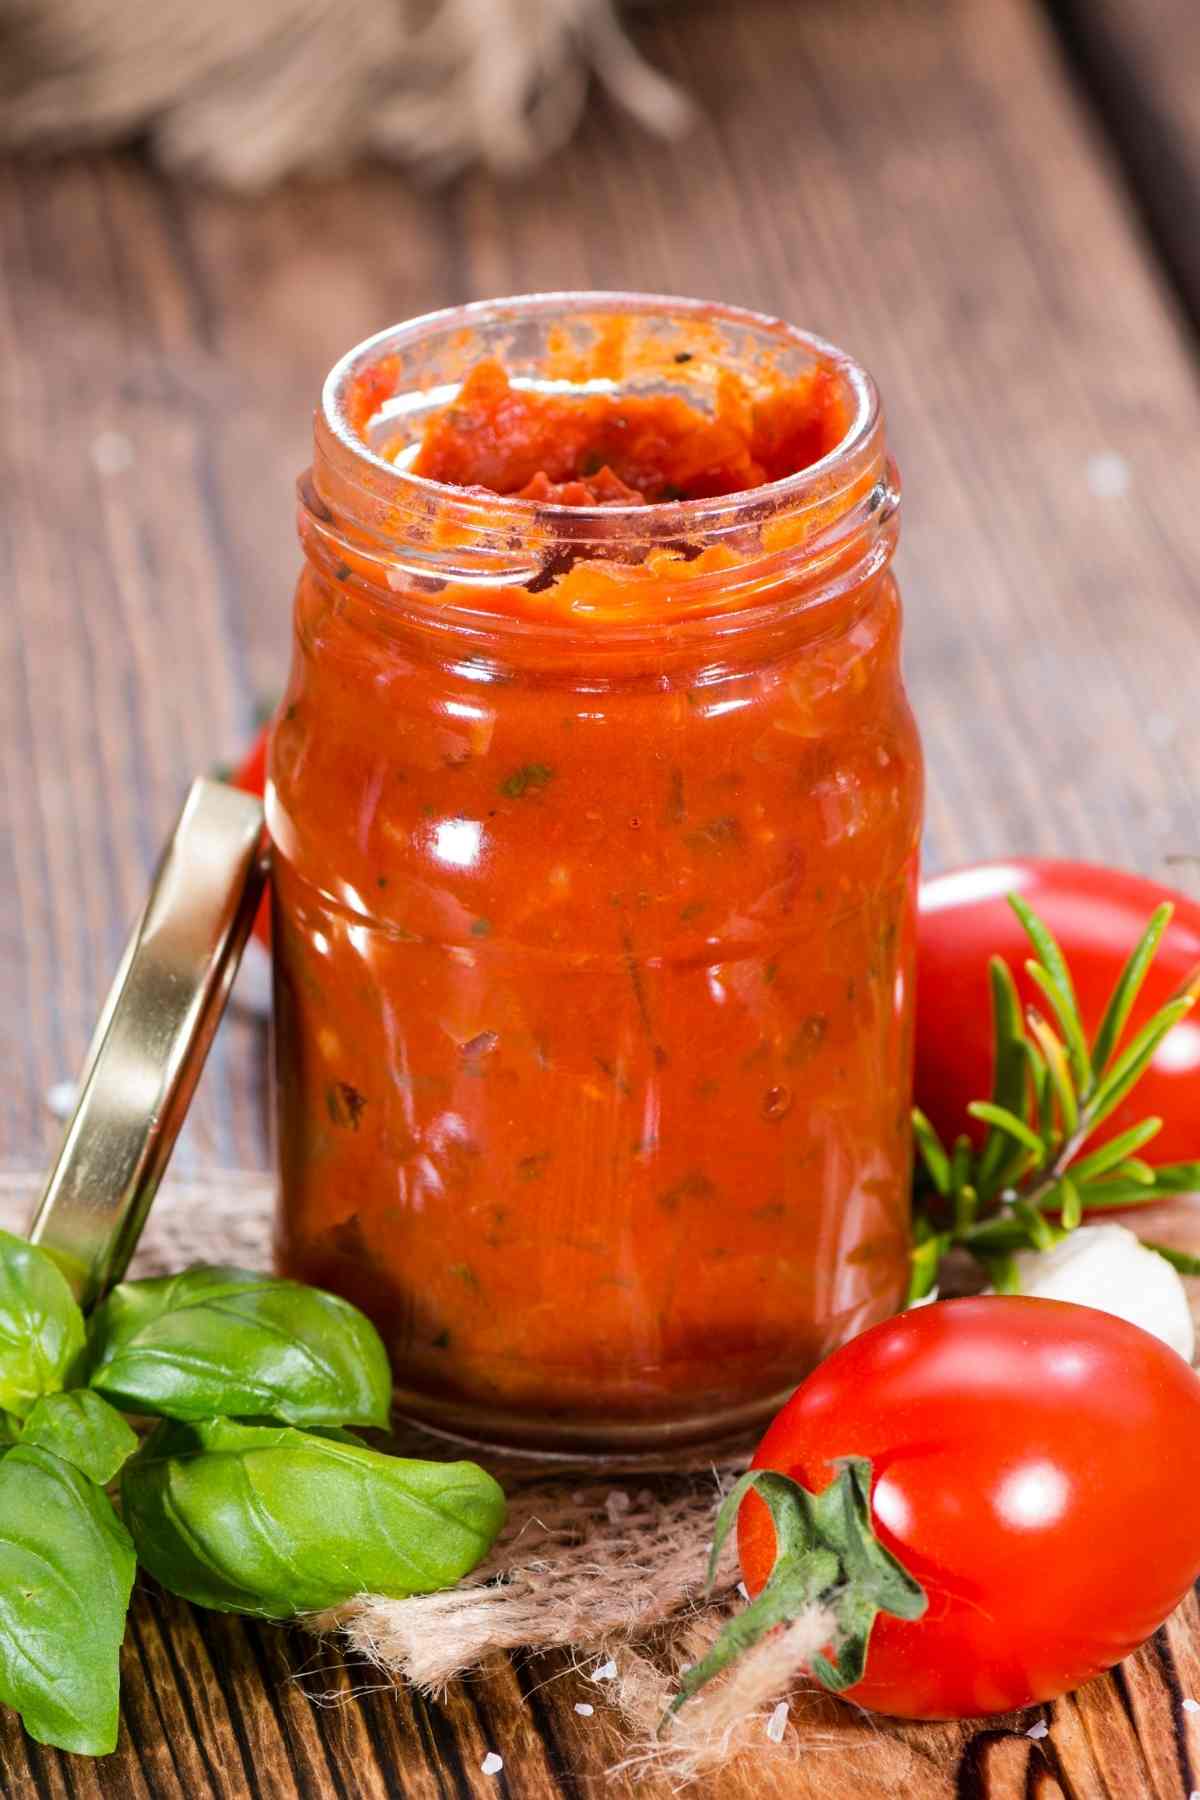 This Homemade Tomato Sauce is loaded with rich tomato flavor. It’s easy to make, and you’ll have fresh tomato sauce to transform into spaghetti sauce, tomato soup, or anything you want!